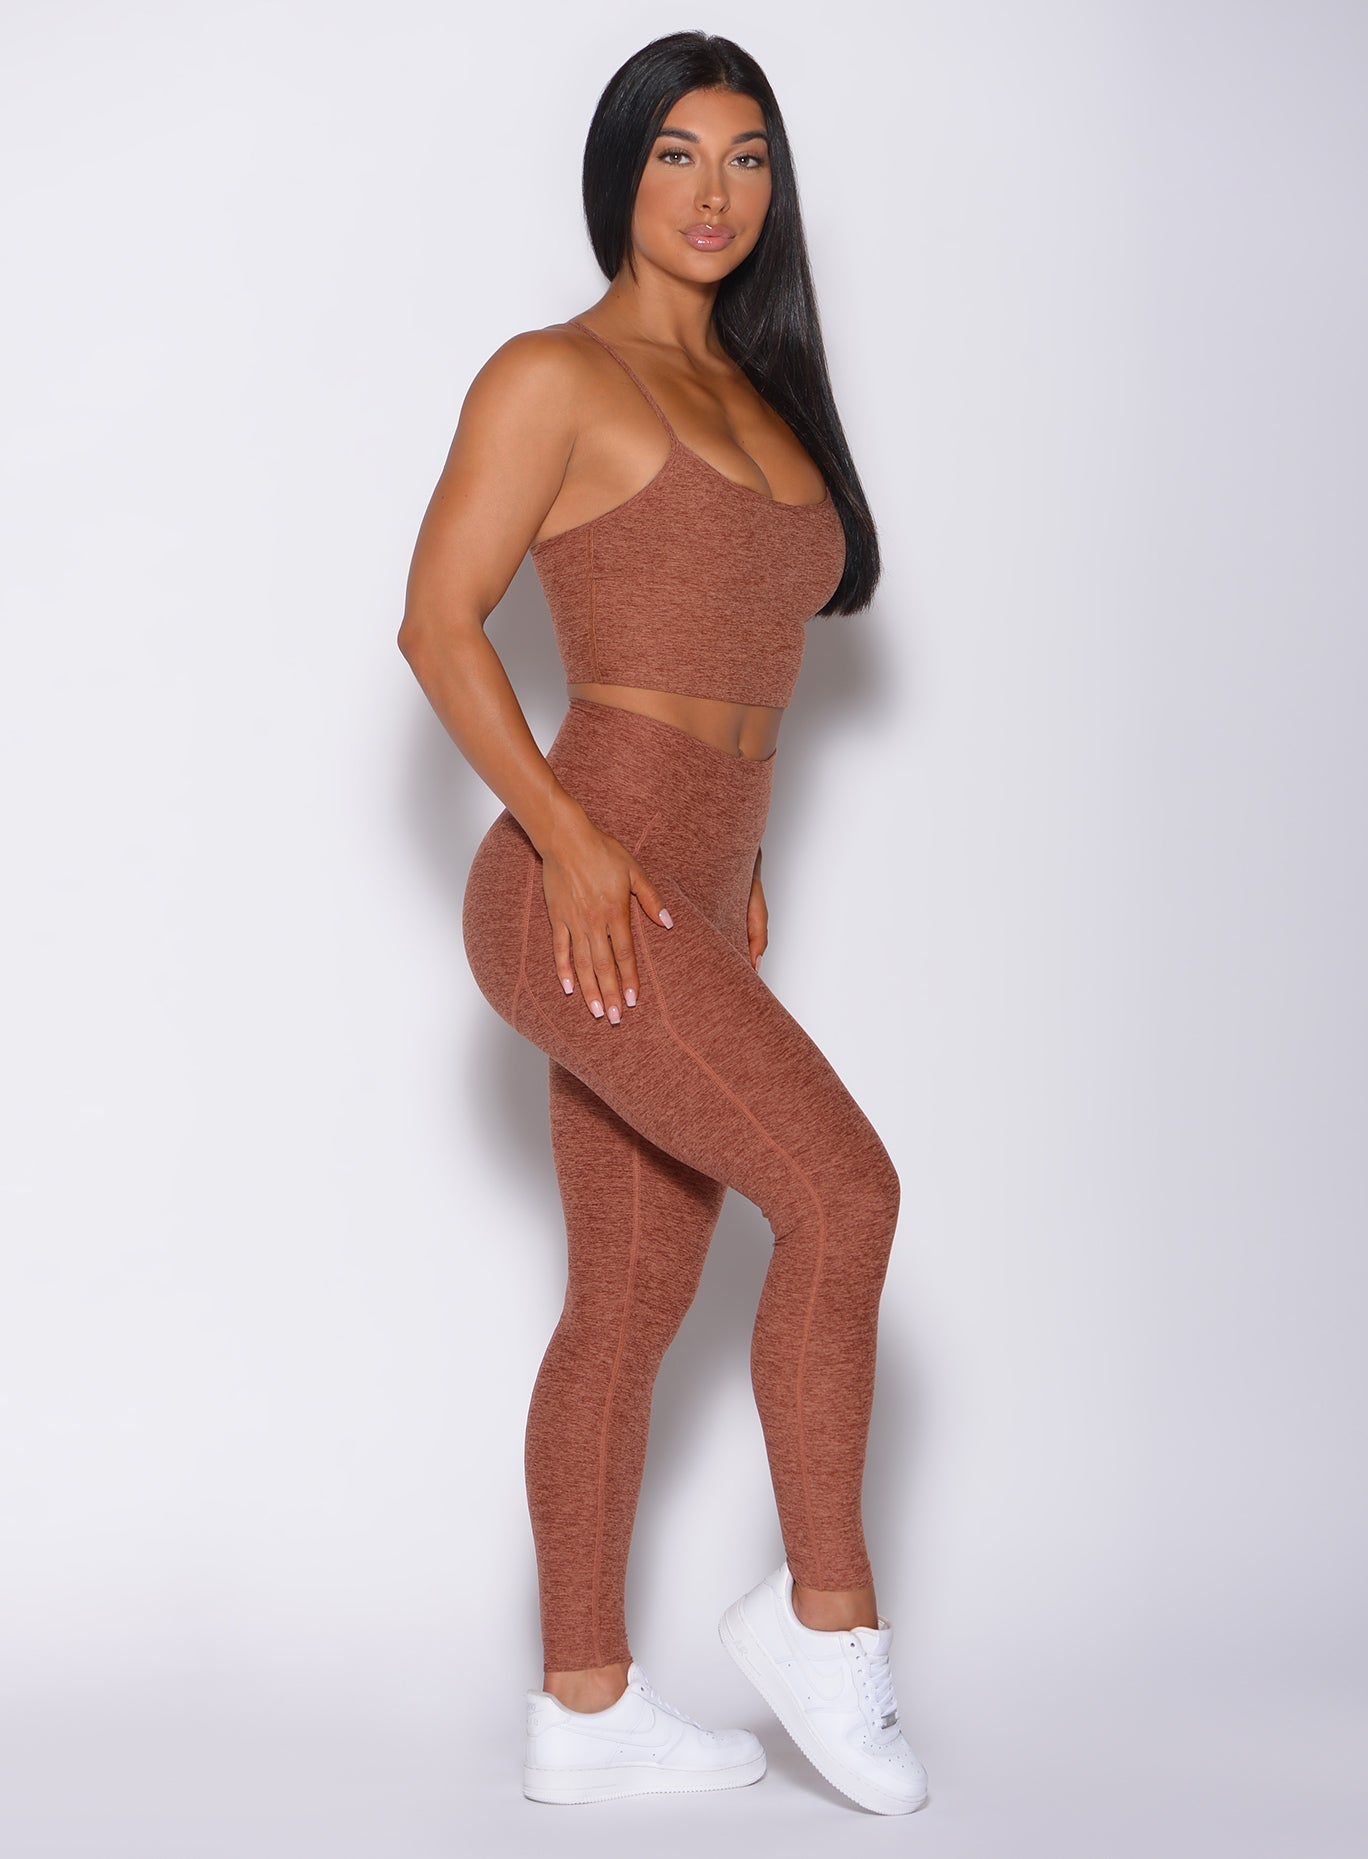 Right side profile view of a model wearing our relax long bra in spiced chai color and a matching leggings